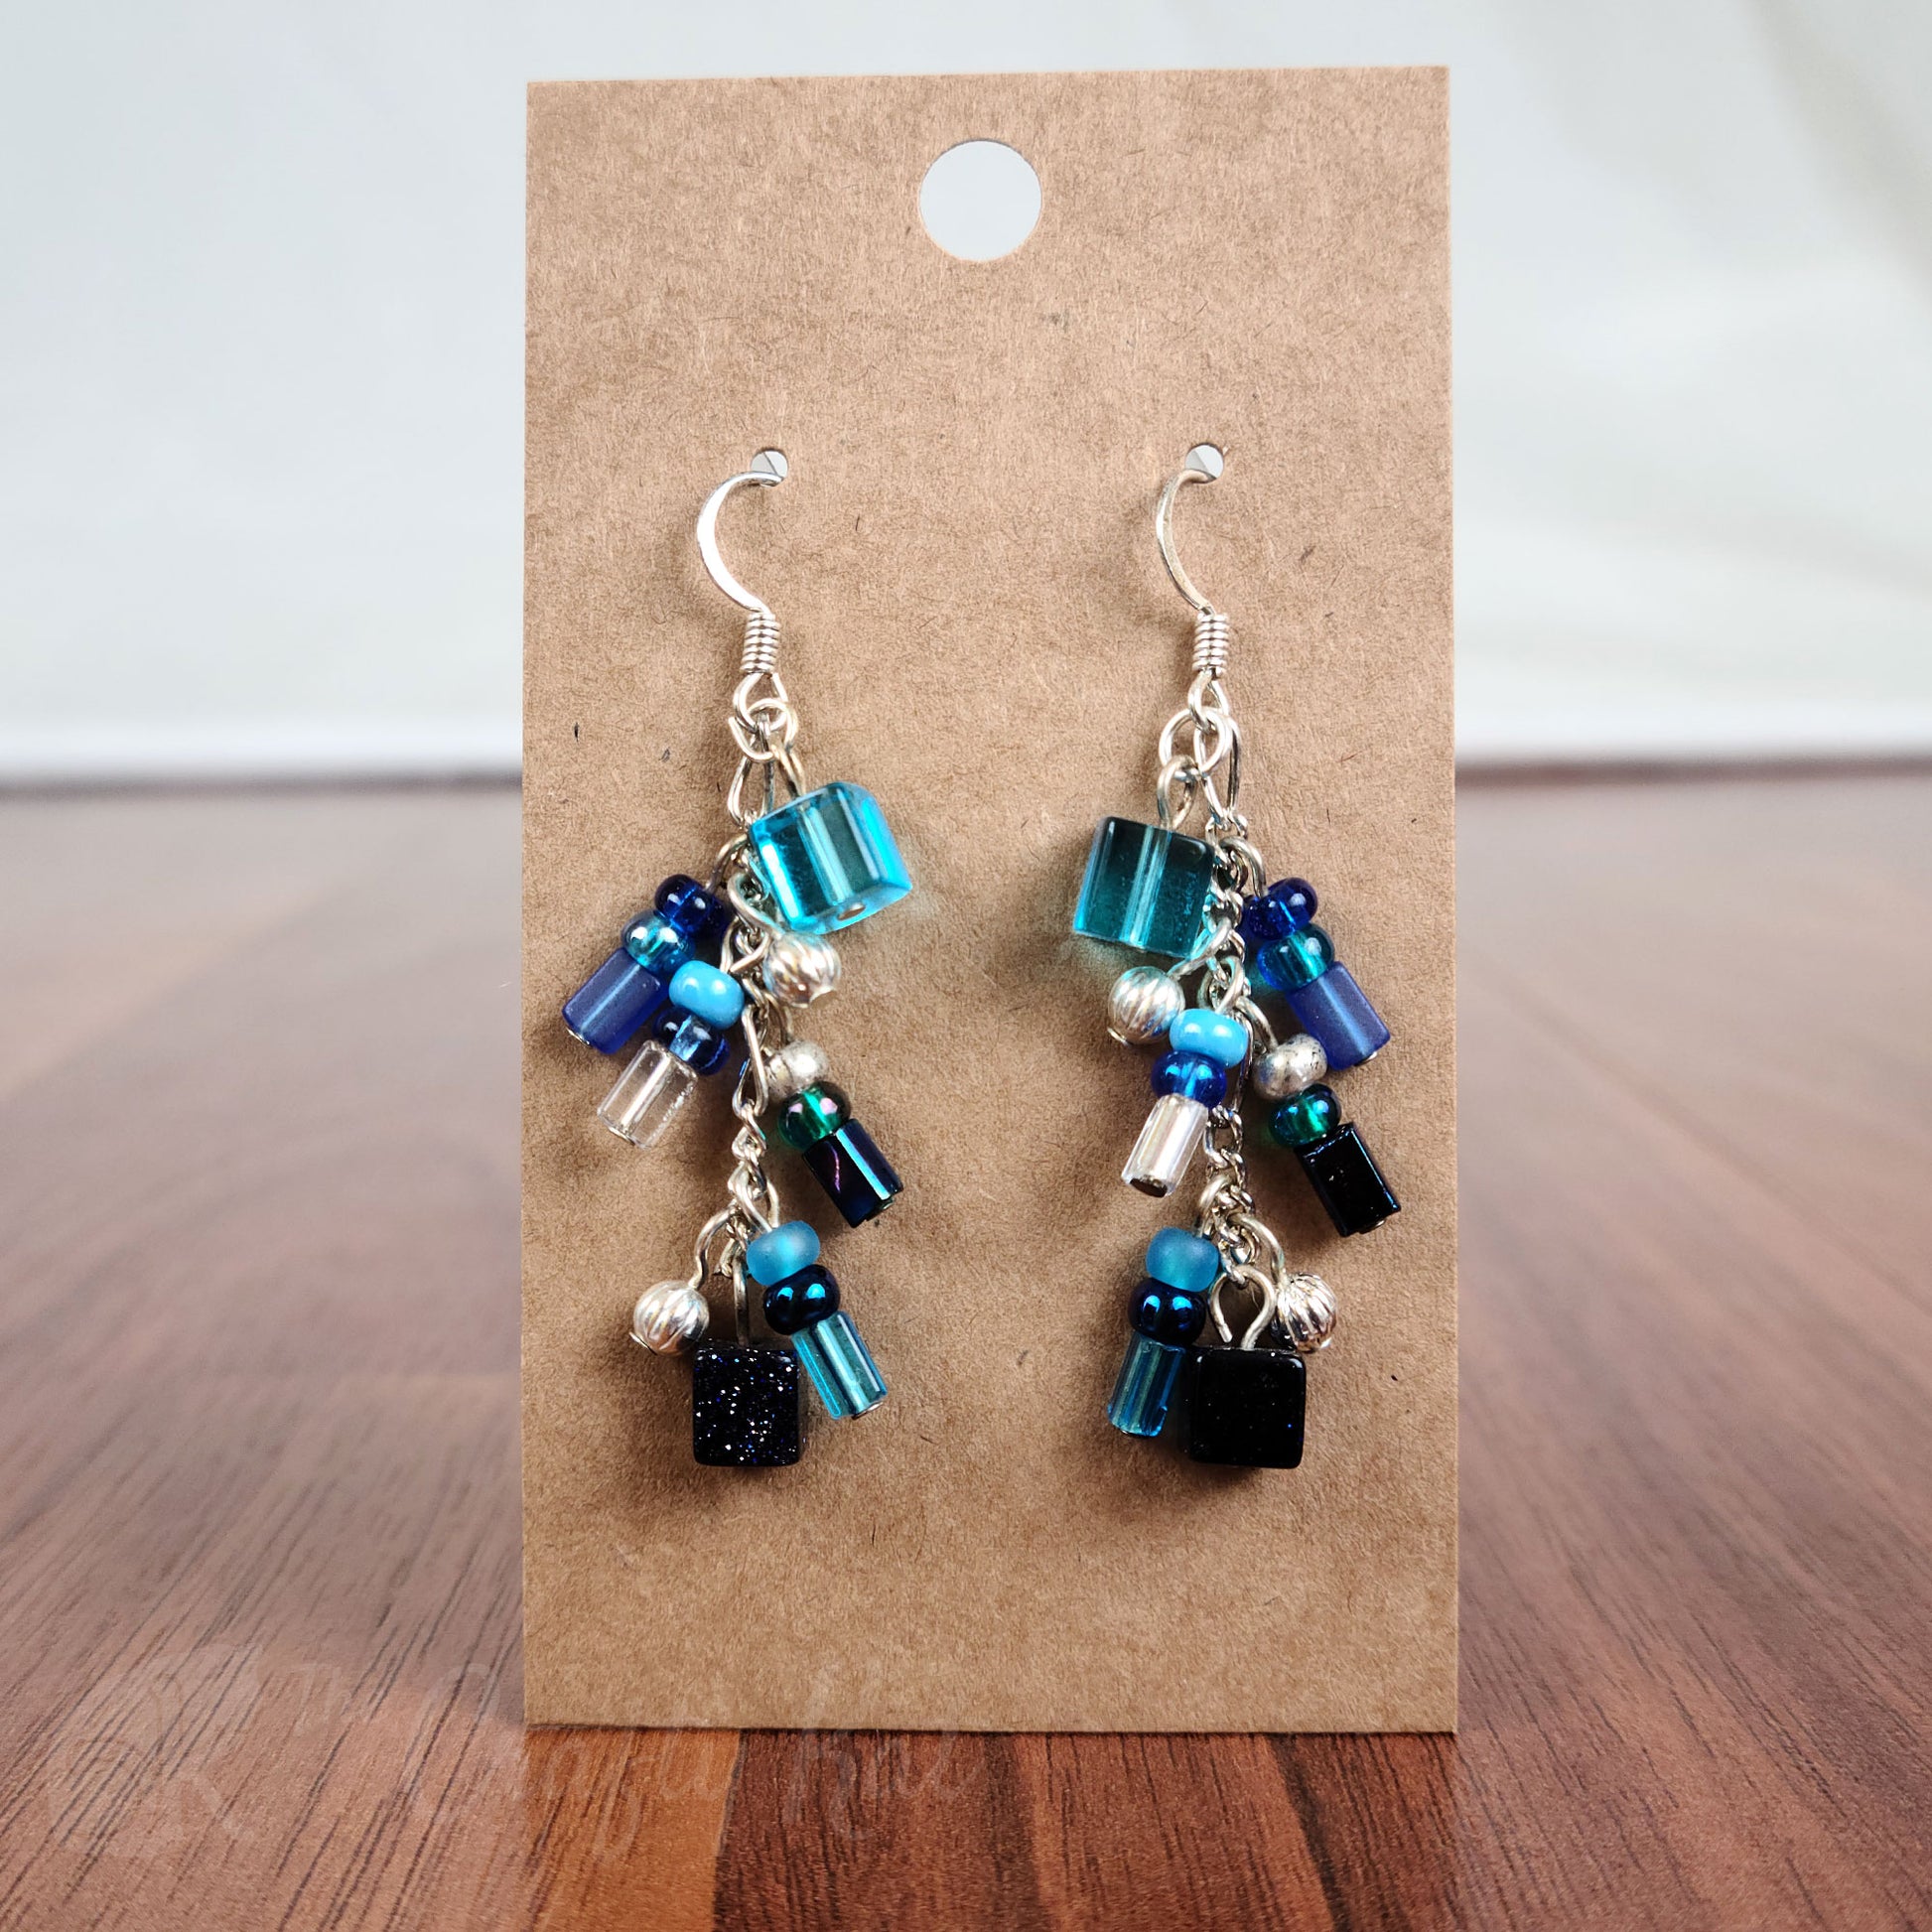 Cascading earrings made of aqua, cerulean, and navy glass, navy goldstone, and silver beads with silver fittings